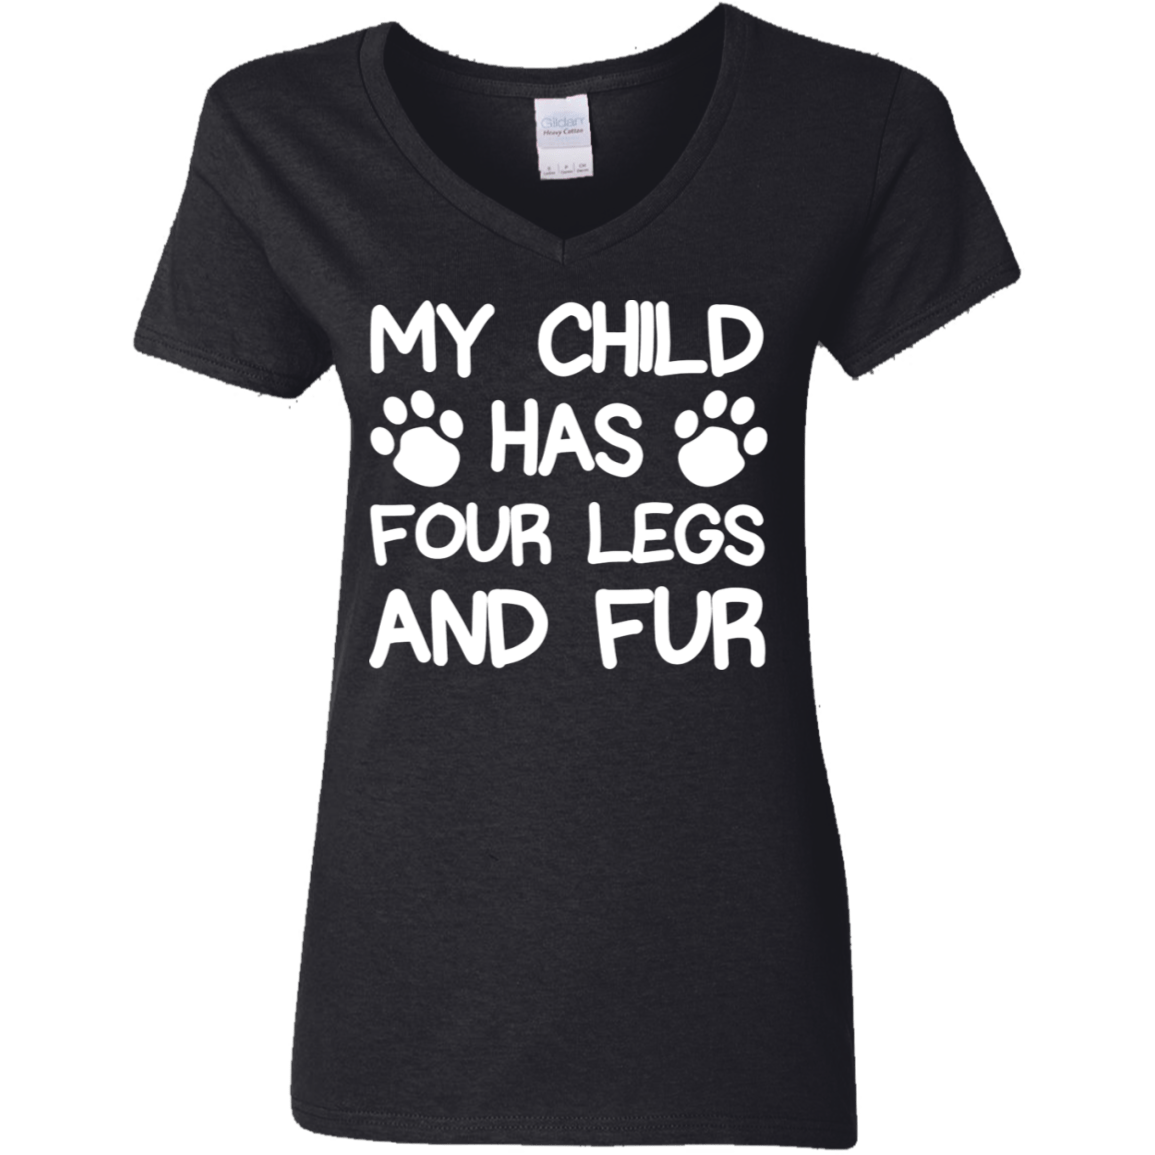 My Child Has Four Legs And Fur - Ladies V Neck.